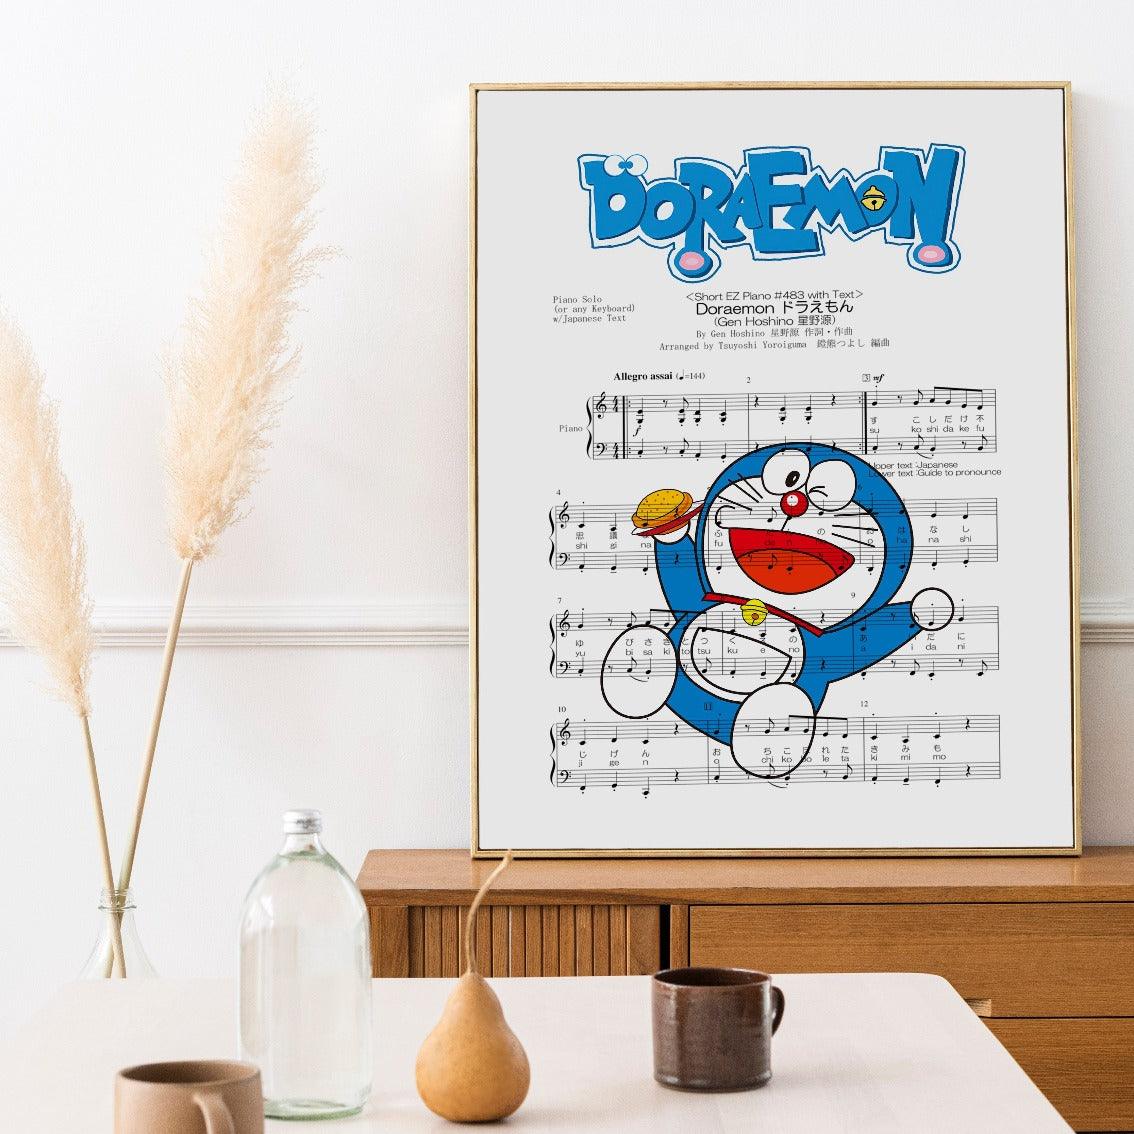 Spice up the walls of your home with this Doraemon Main Theme Poster. Perfect for adding a personal touch to any room, this poster celebrates the iconic music and lyrics of a beloved song. Printed on sturdy matte paper, the vivid colors are sure to stand out. Whether it's a gift for a special occasion or just something to bring life to your walls, this poster is guaranteed to be treasured. Hang it up and get ready for beautiful memories and lots of fun!